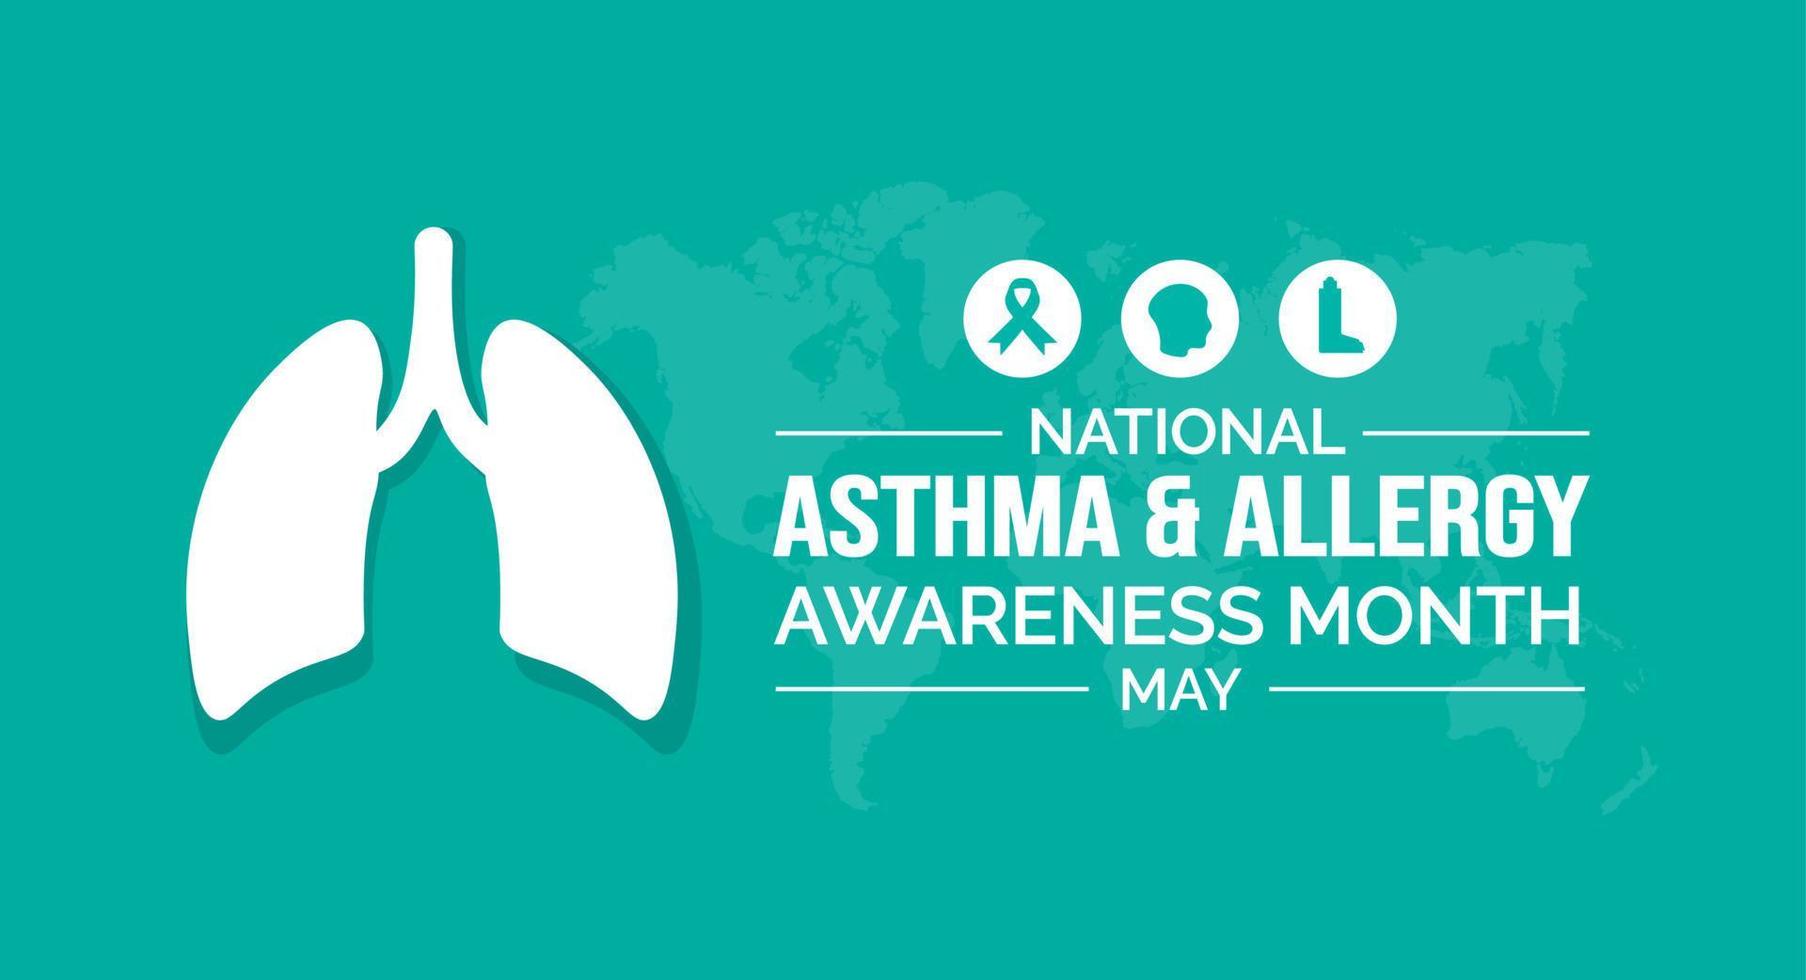 National Asthma and Allergy Awareness Month background or banner design template celebrated in may vector